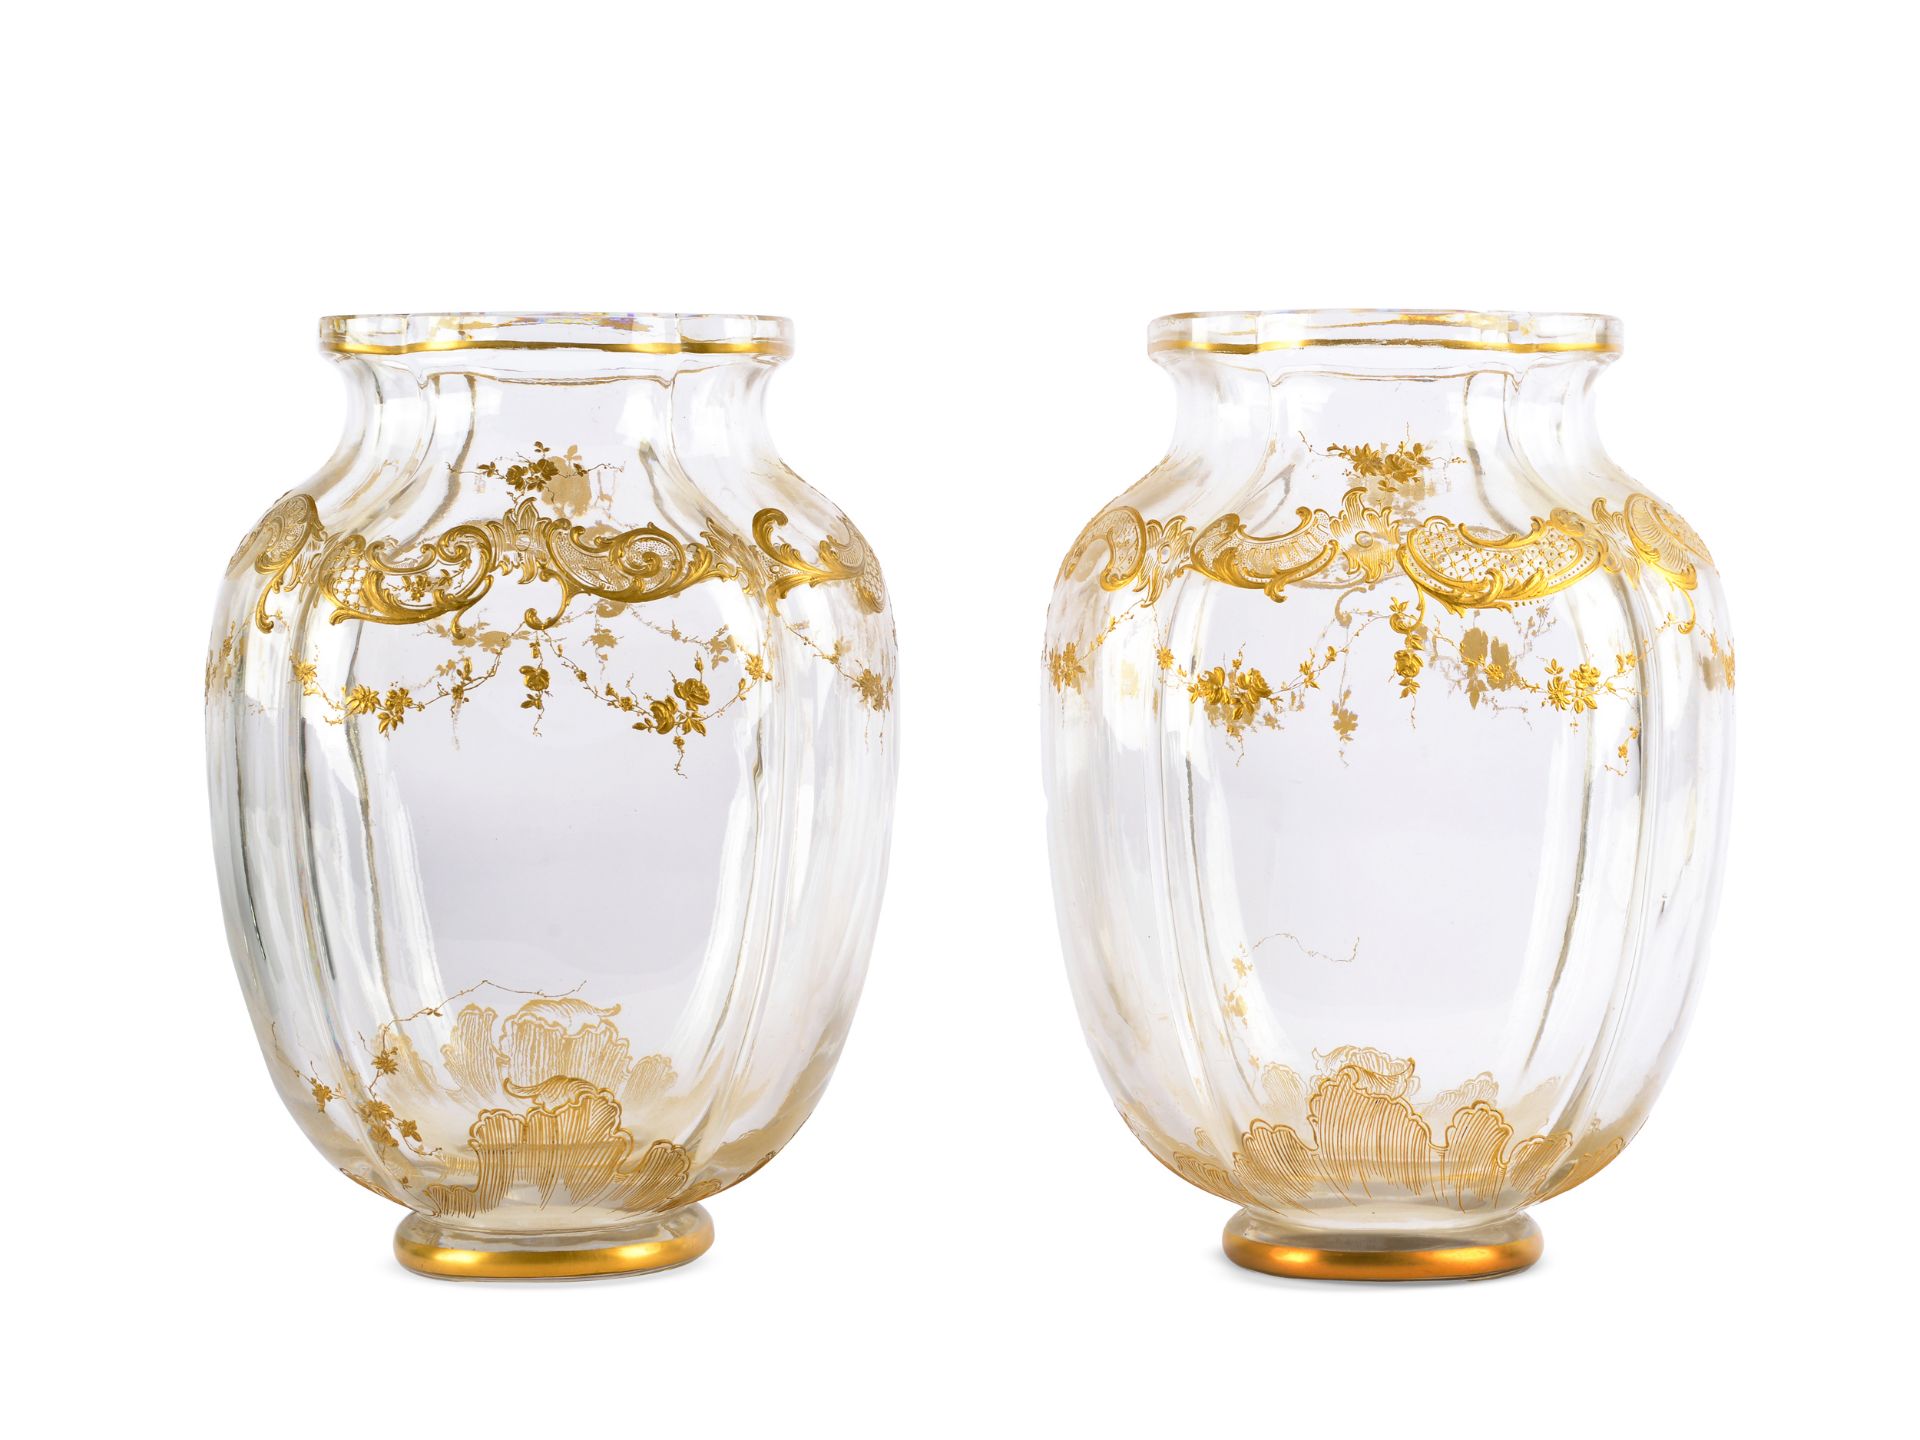 Lobmeyr Vienna, Pair of vases, Colourless glass with gold decoration in relief - Image 2 of 3